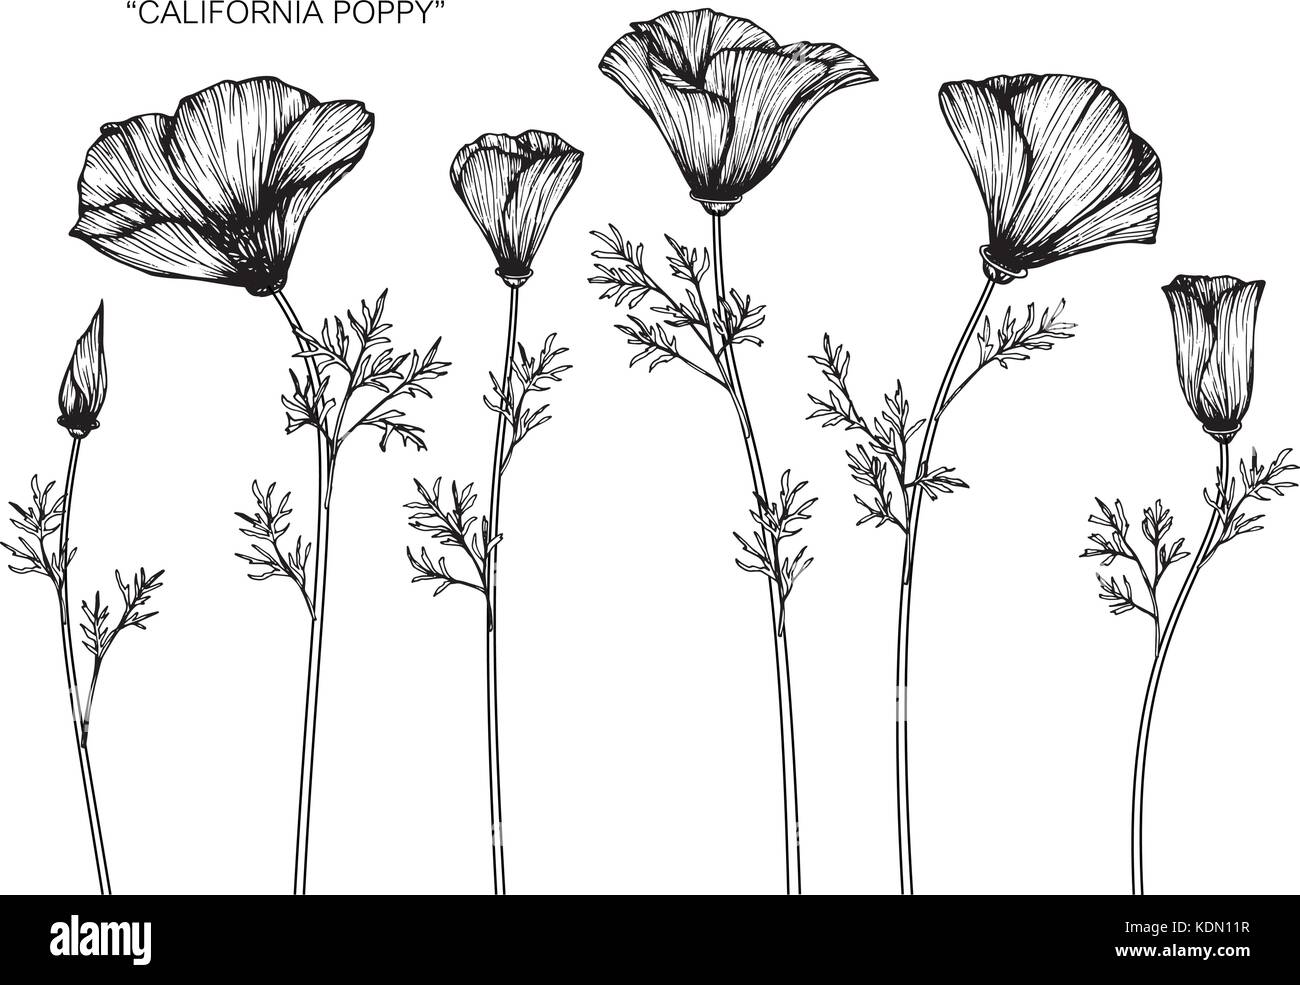 California poppy flower drawing illustration. Black and white with line